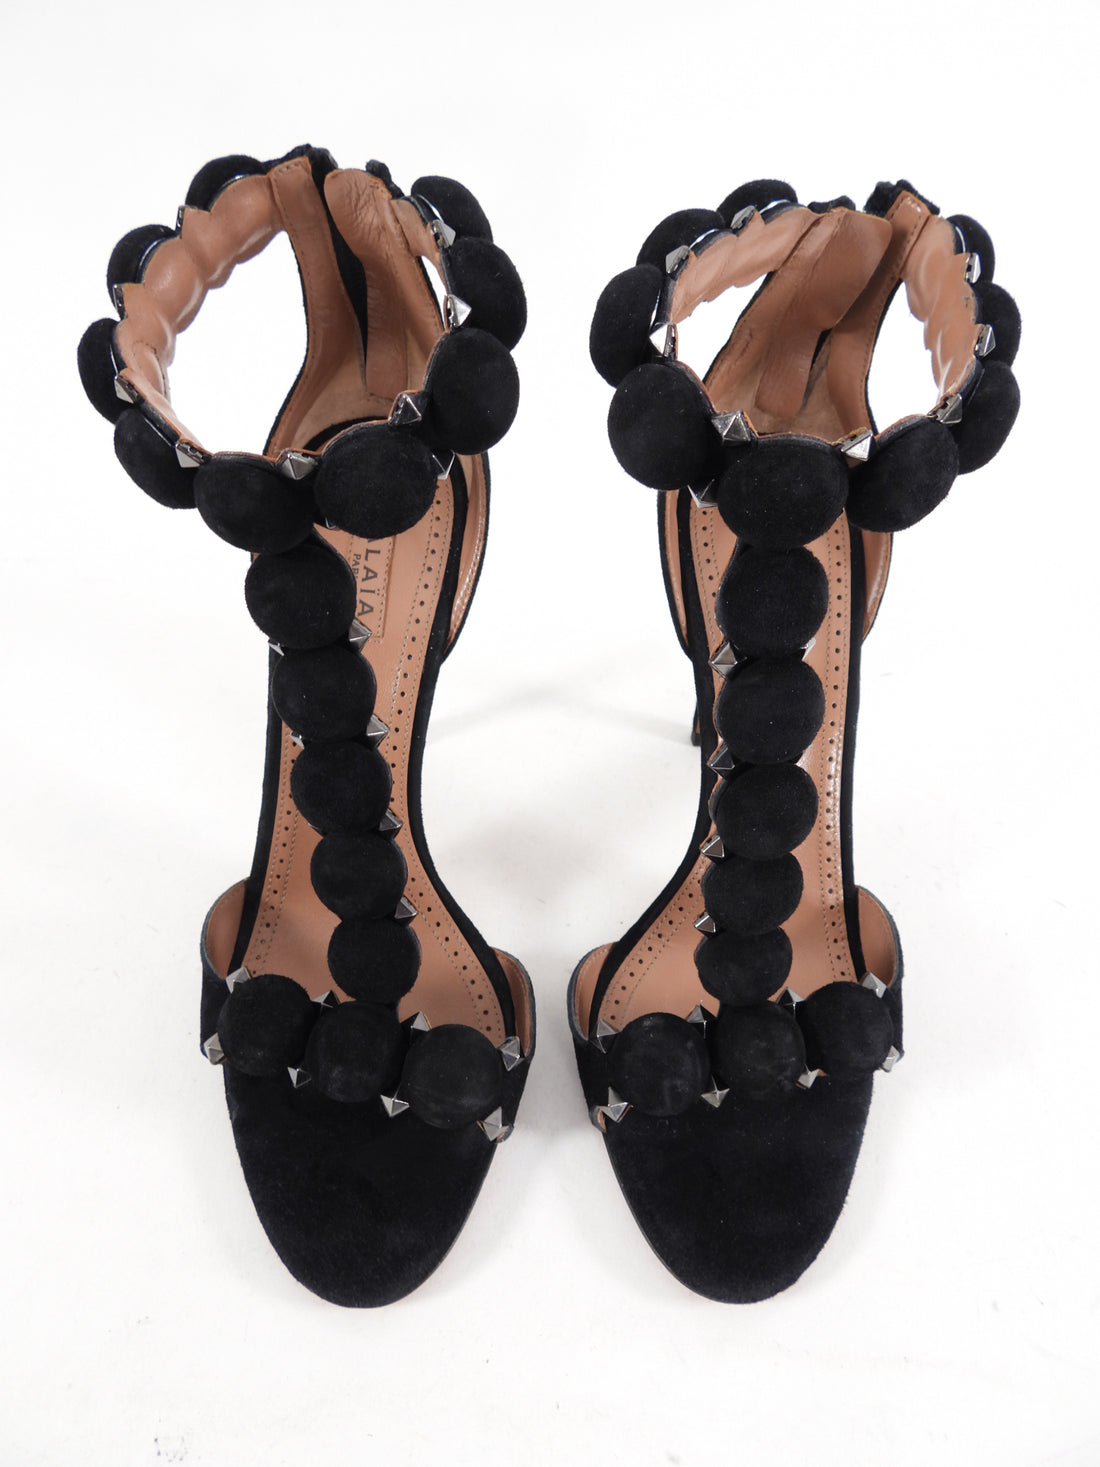 Alaia Black Suede Bombe 110mm Sandals - USA 7.5